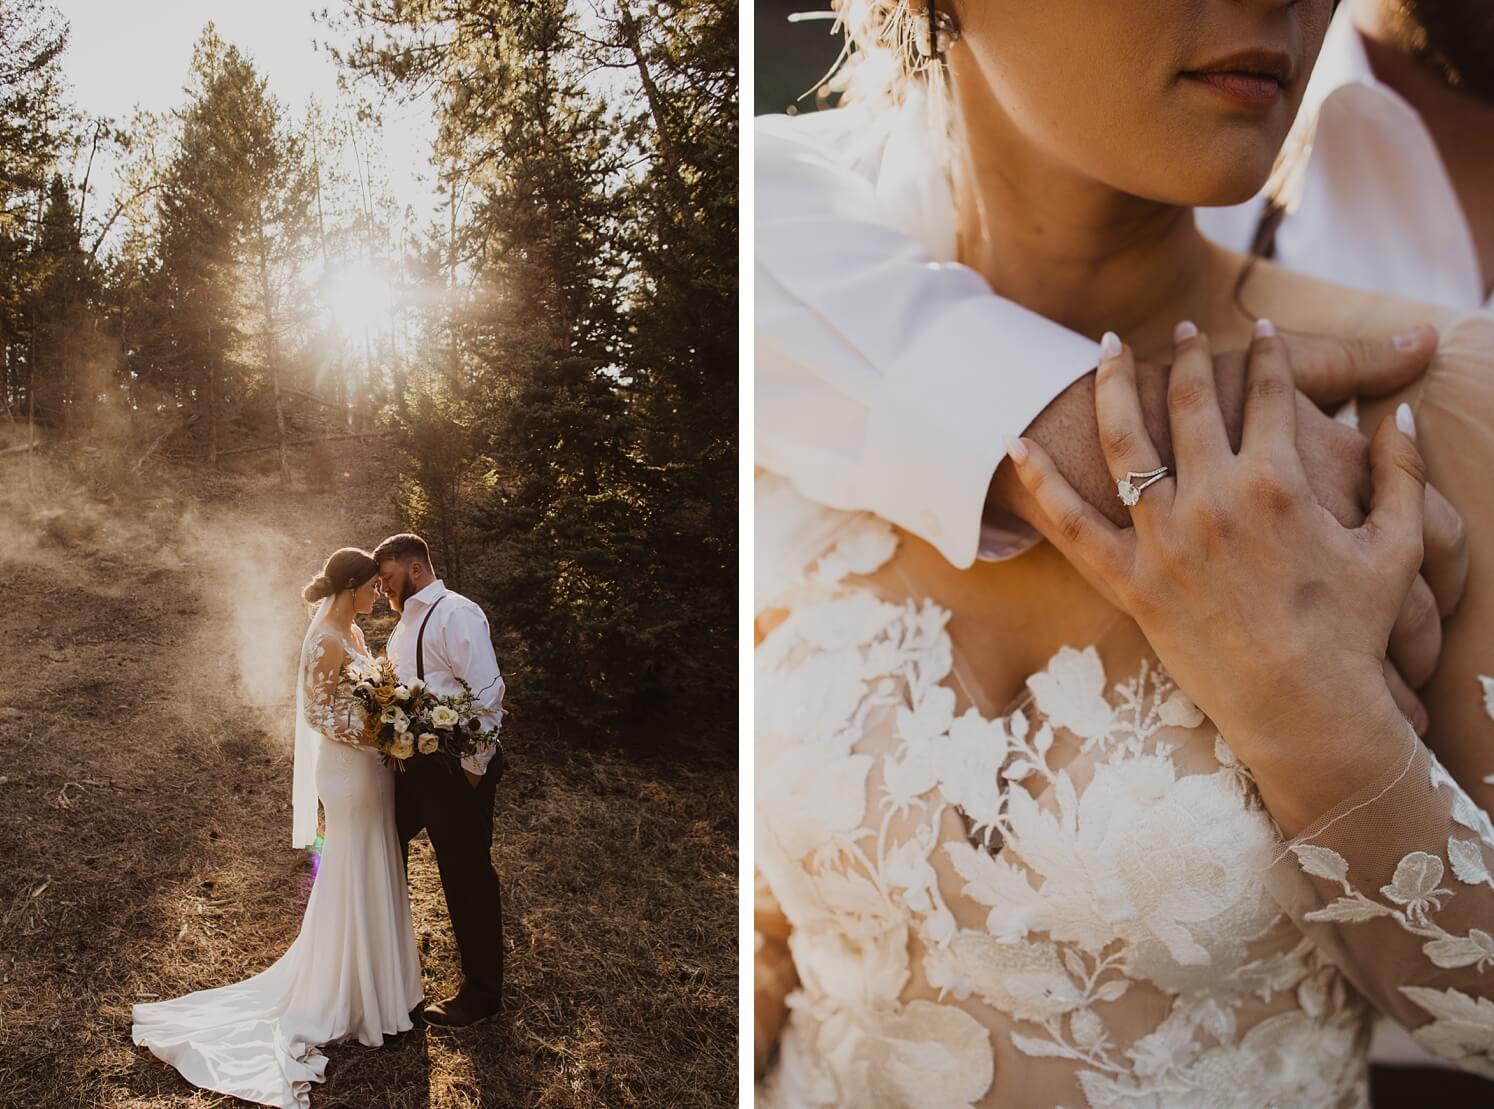 Bride and groom looking at each other in forest | Pear shaped wedding ring | McArthur Weddings and Events